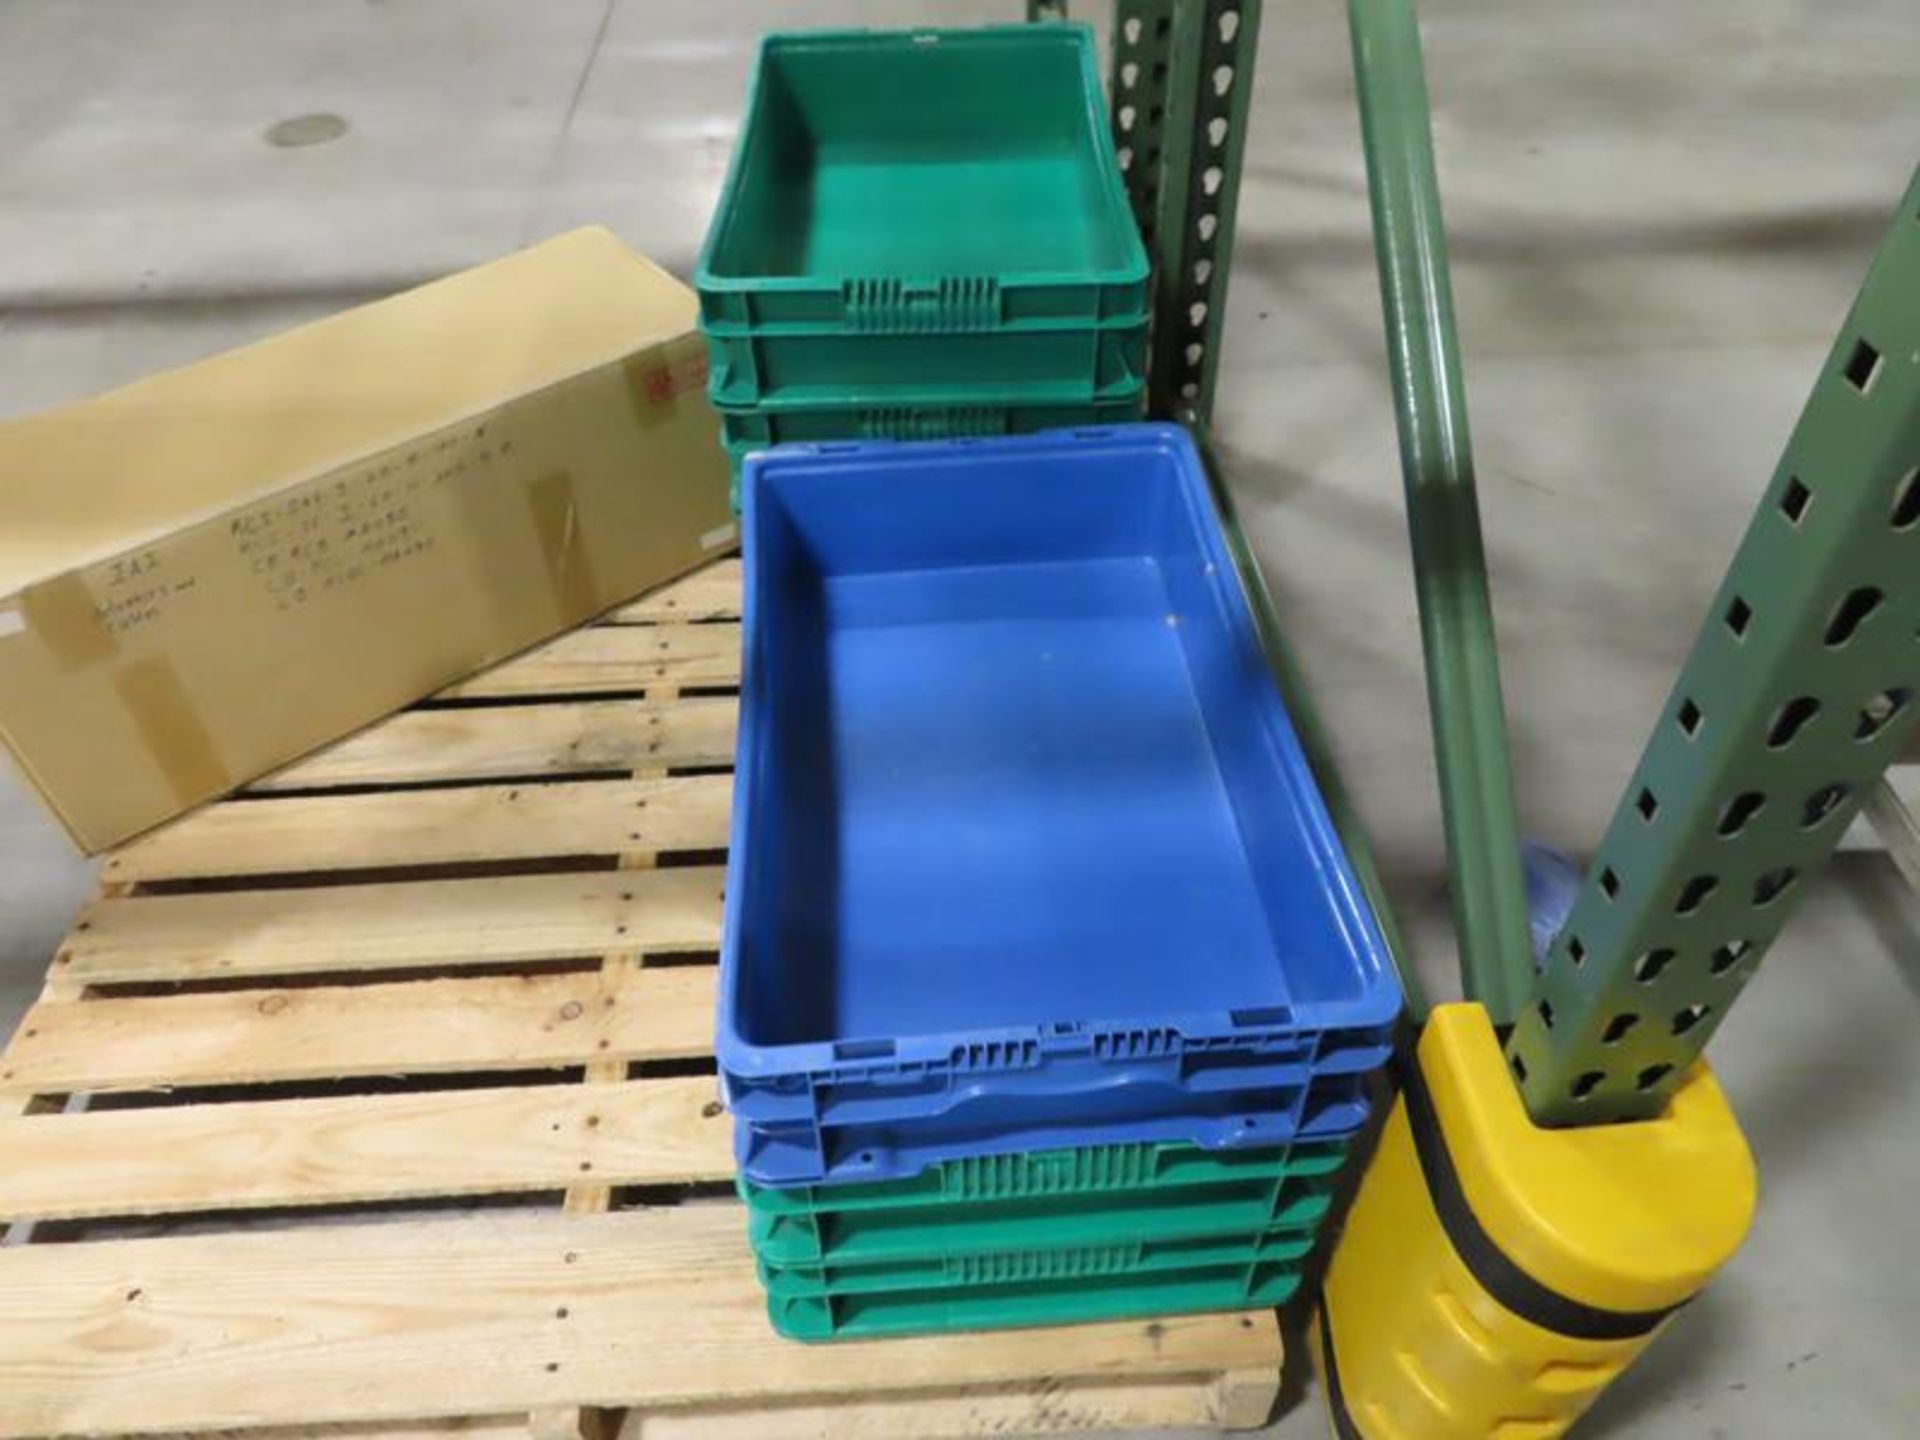 Spill Kits, Misc Keyance, Omiron and other parts, 3 plastic pallets and rolling cart - Image 7 of 7